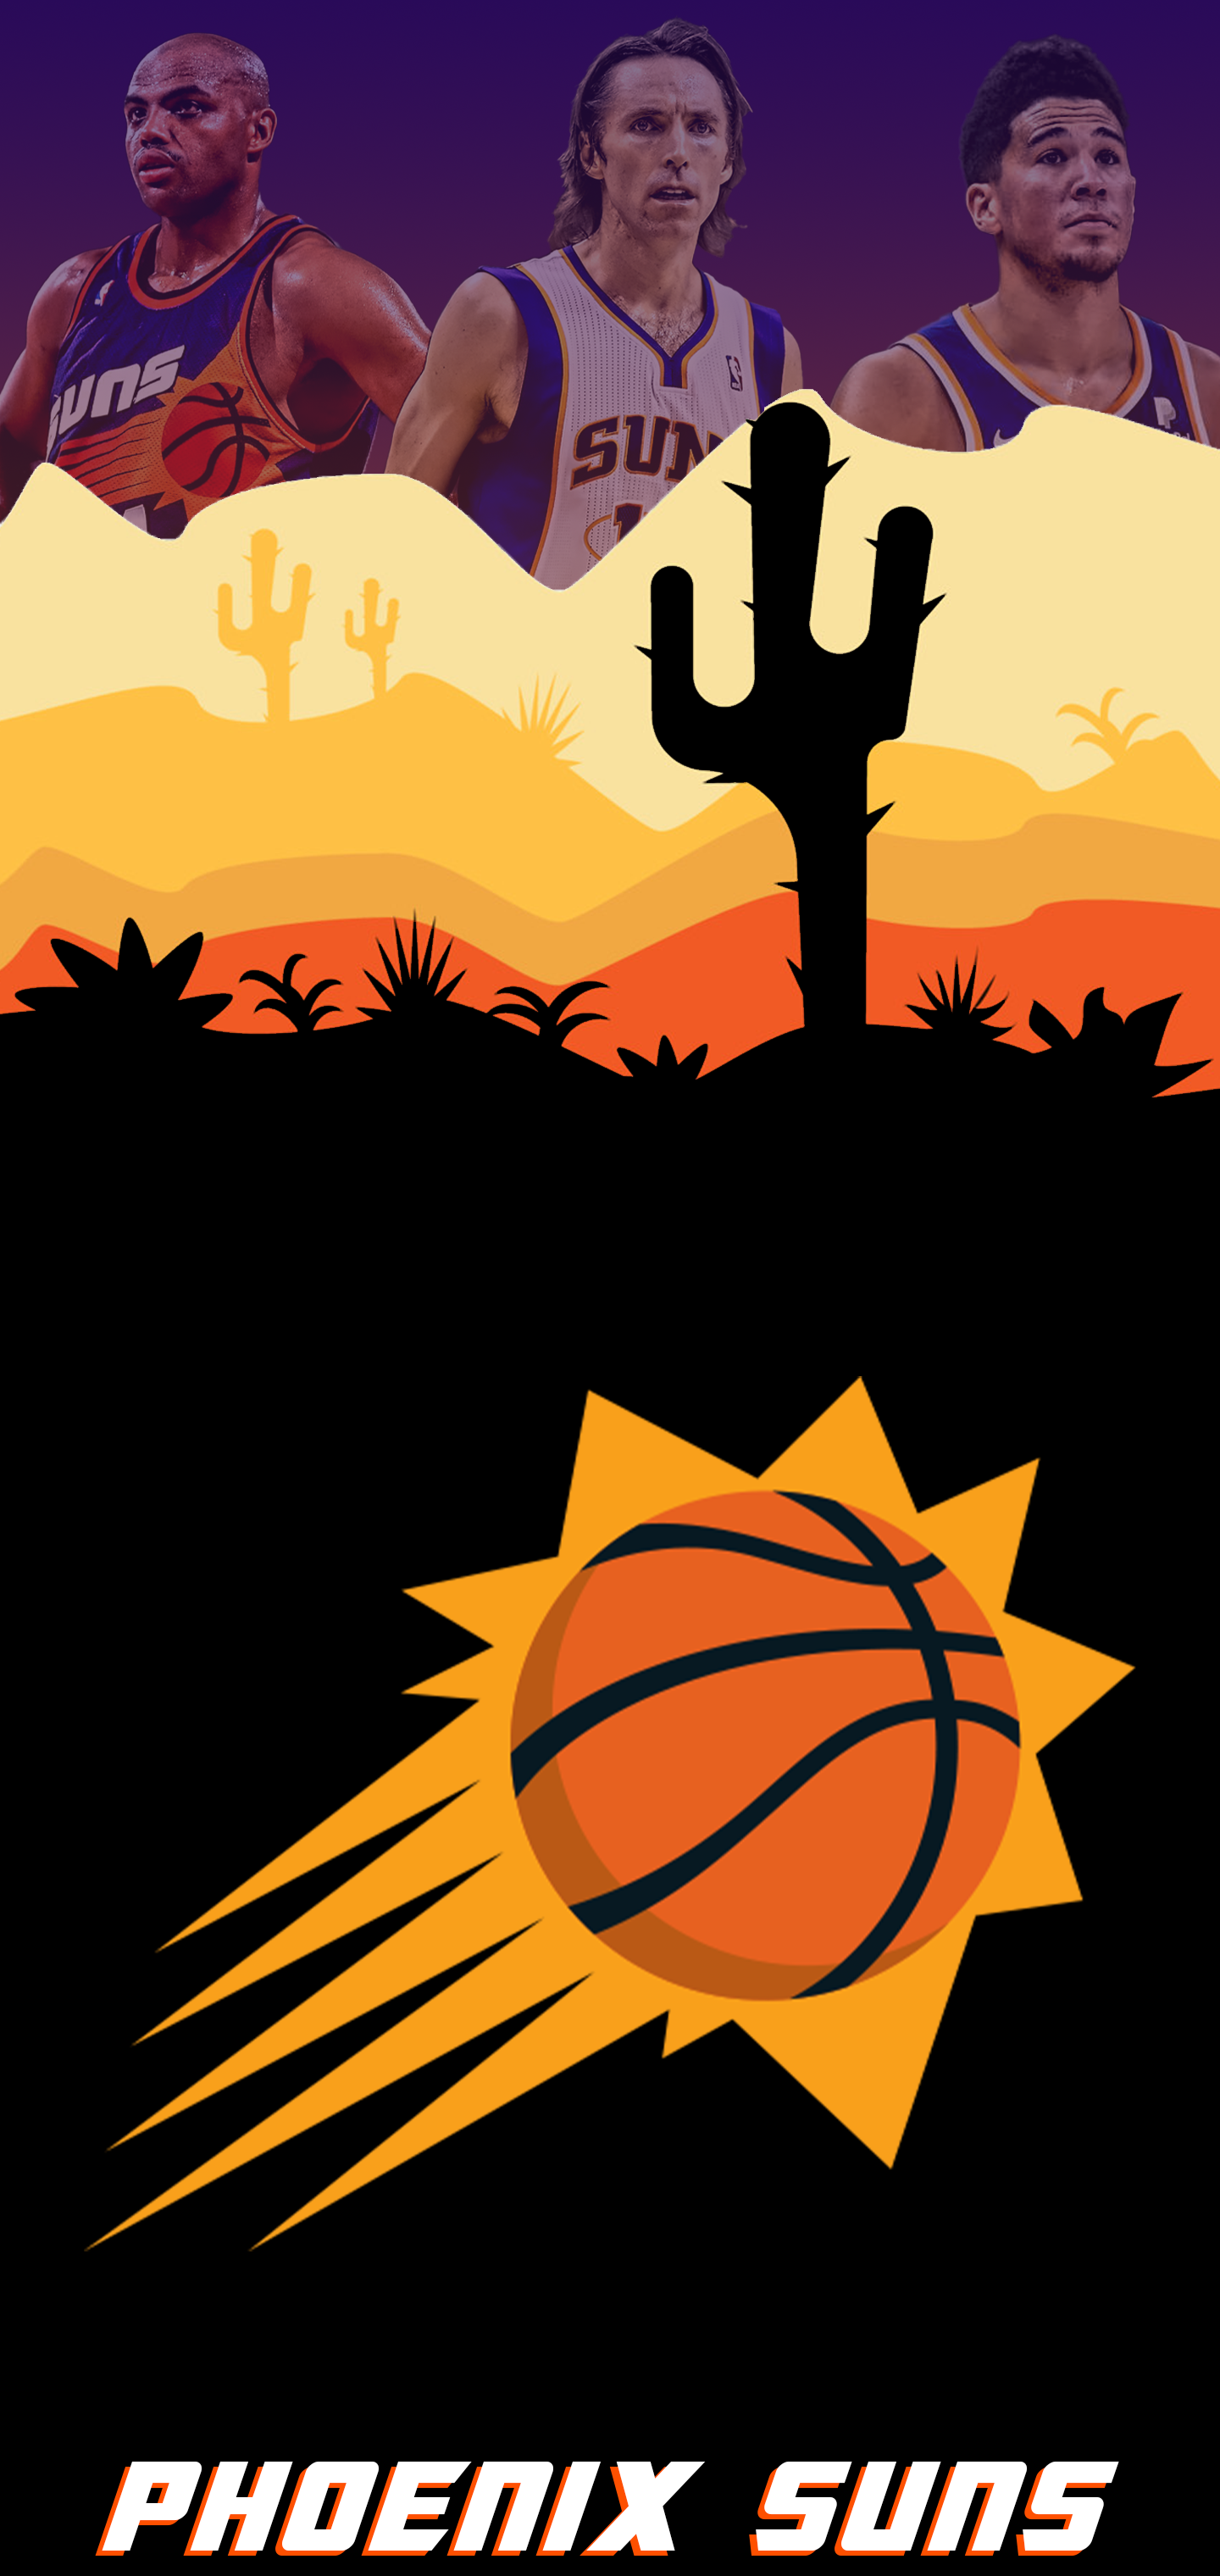 Heres a different version of the Suns wallpaper for anyone who